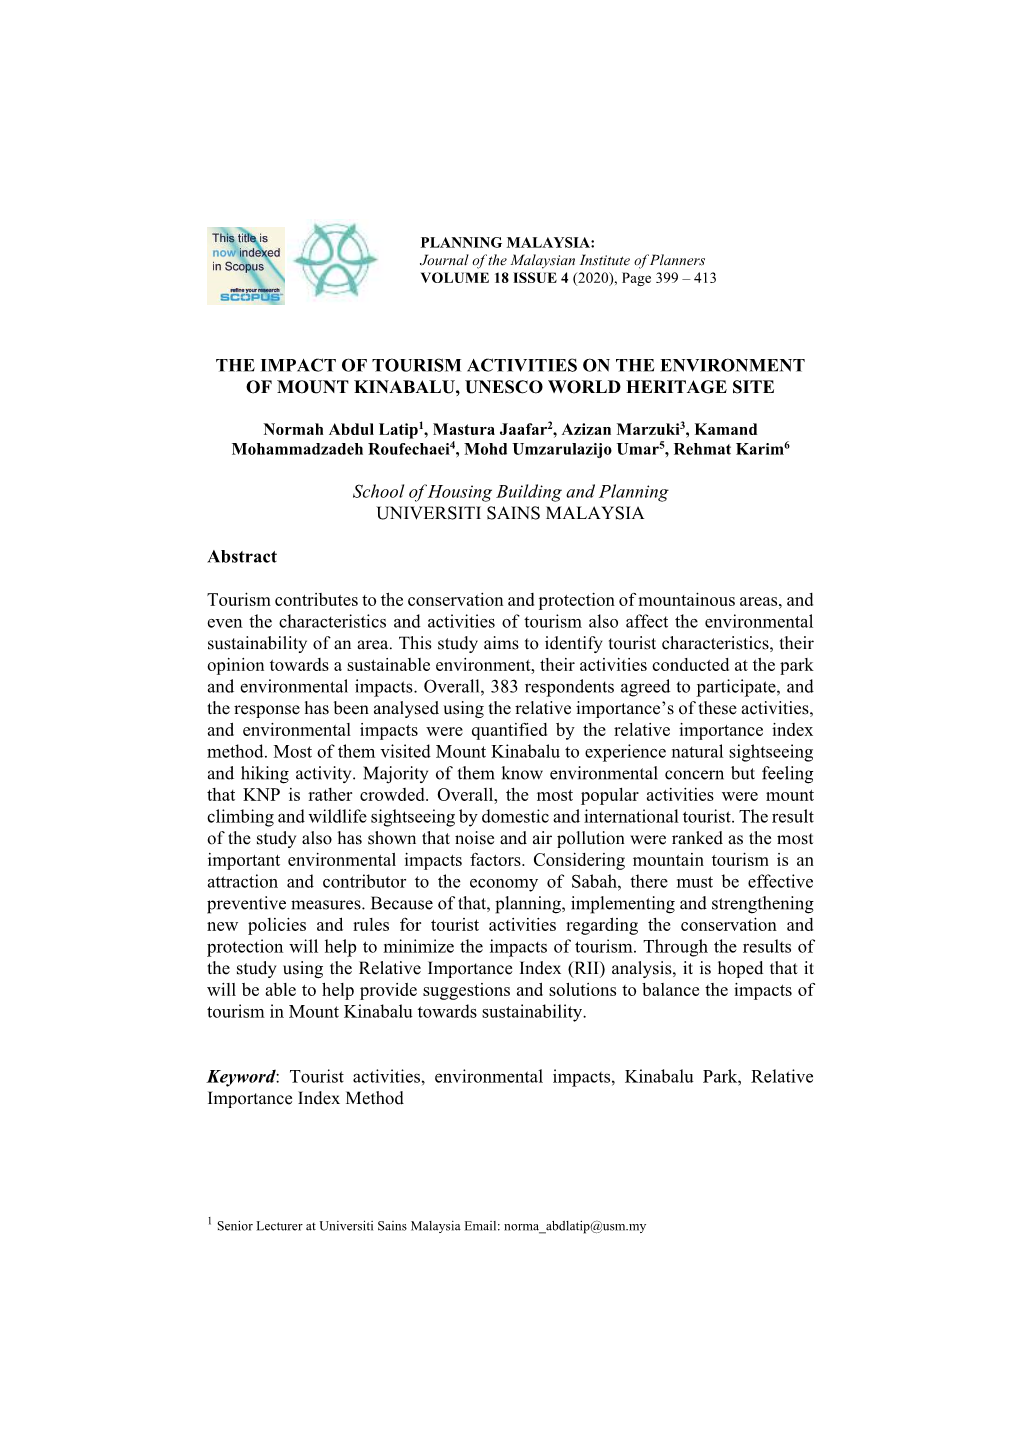 The Impact of Tourism Activities on the Environment of Mount Kinabalu, Unesco World Heritage Site